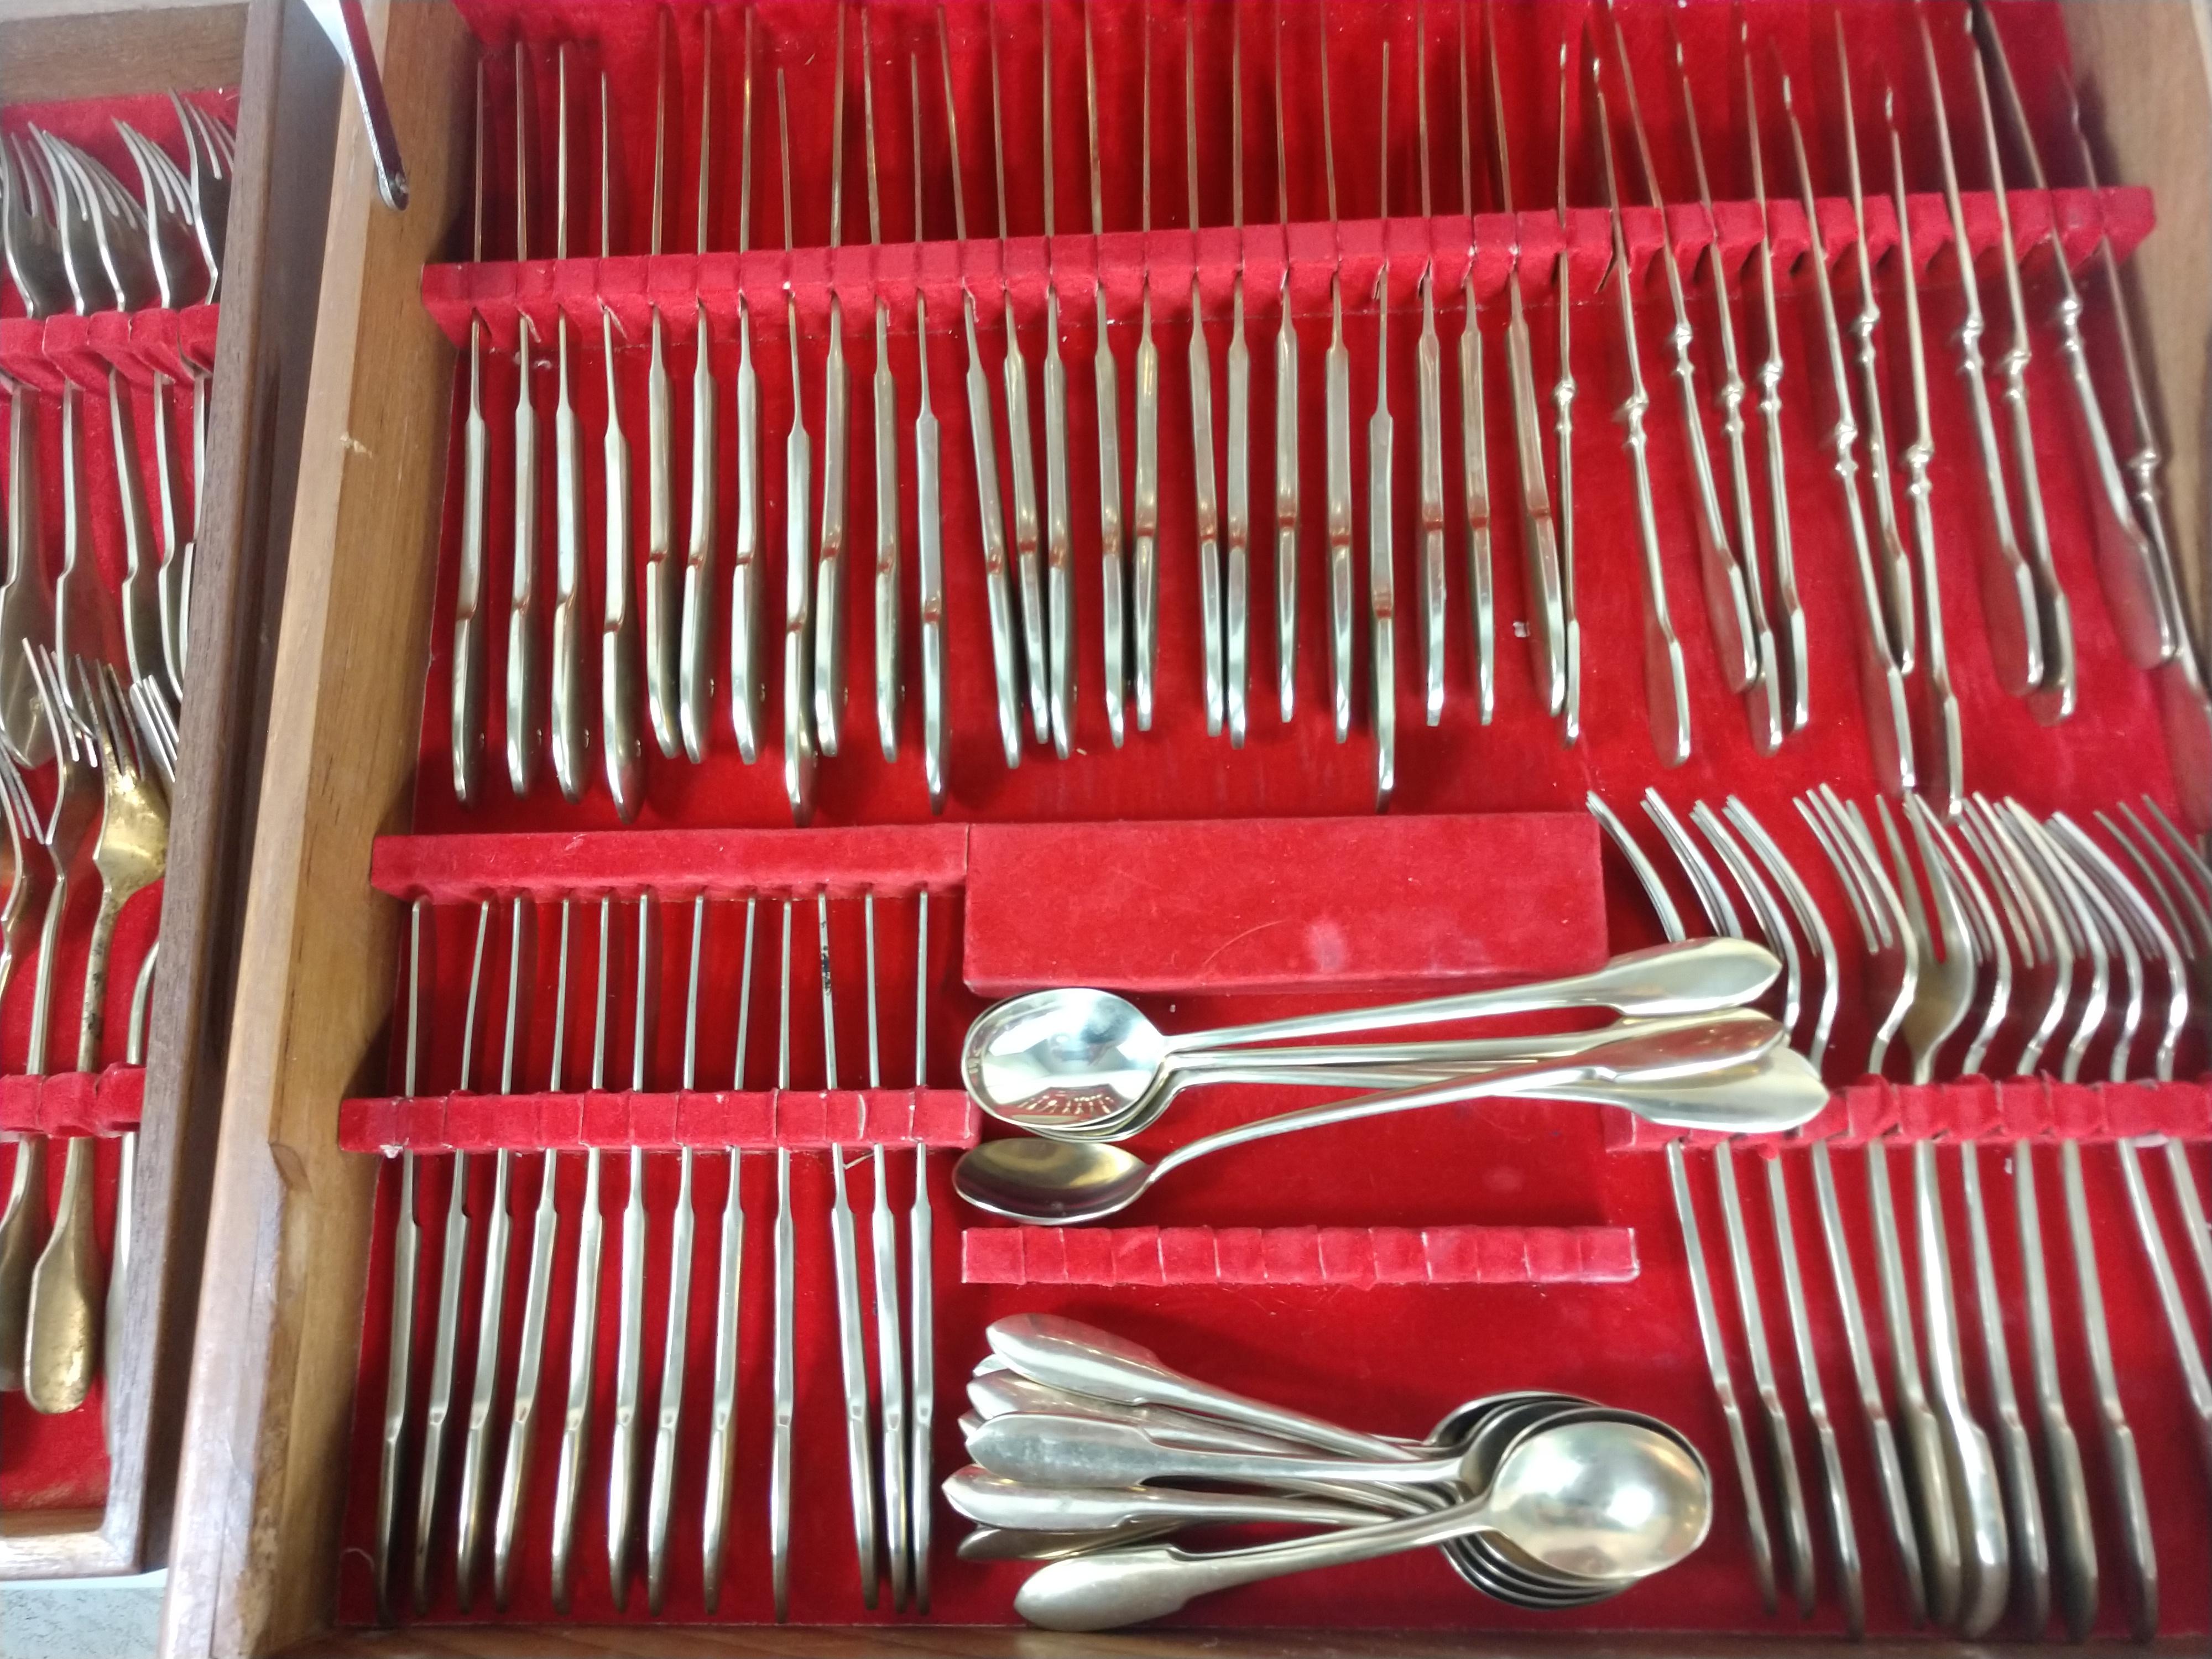 Full Set of Nickel Bronze Mid Century Modern Flatware 153pcs, Boxed In Good Condition For Sale In Port Jervis, NY